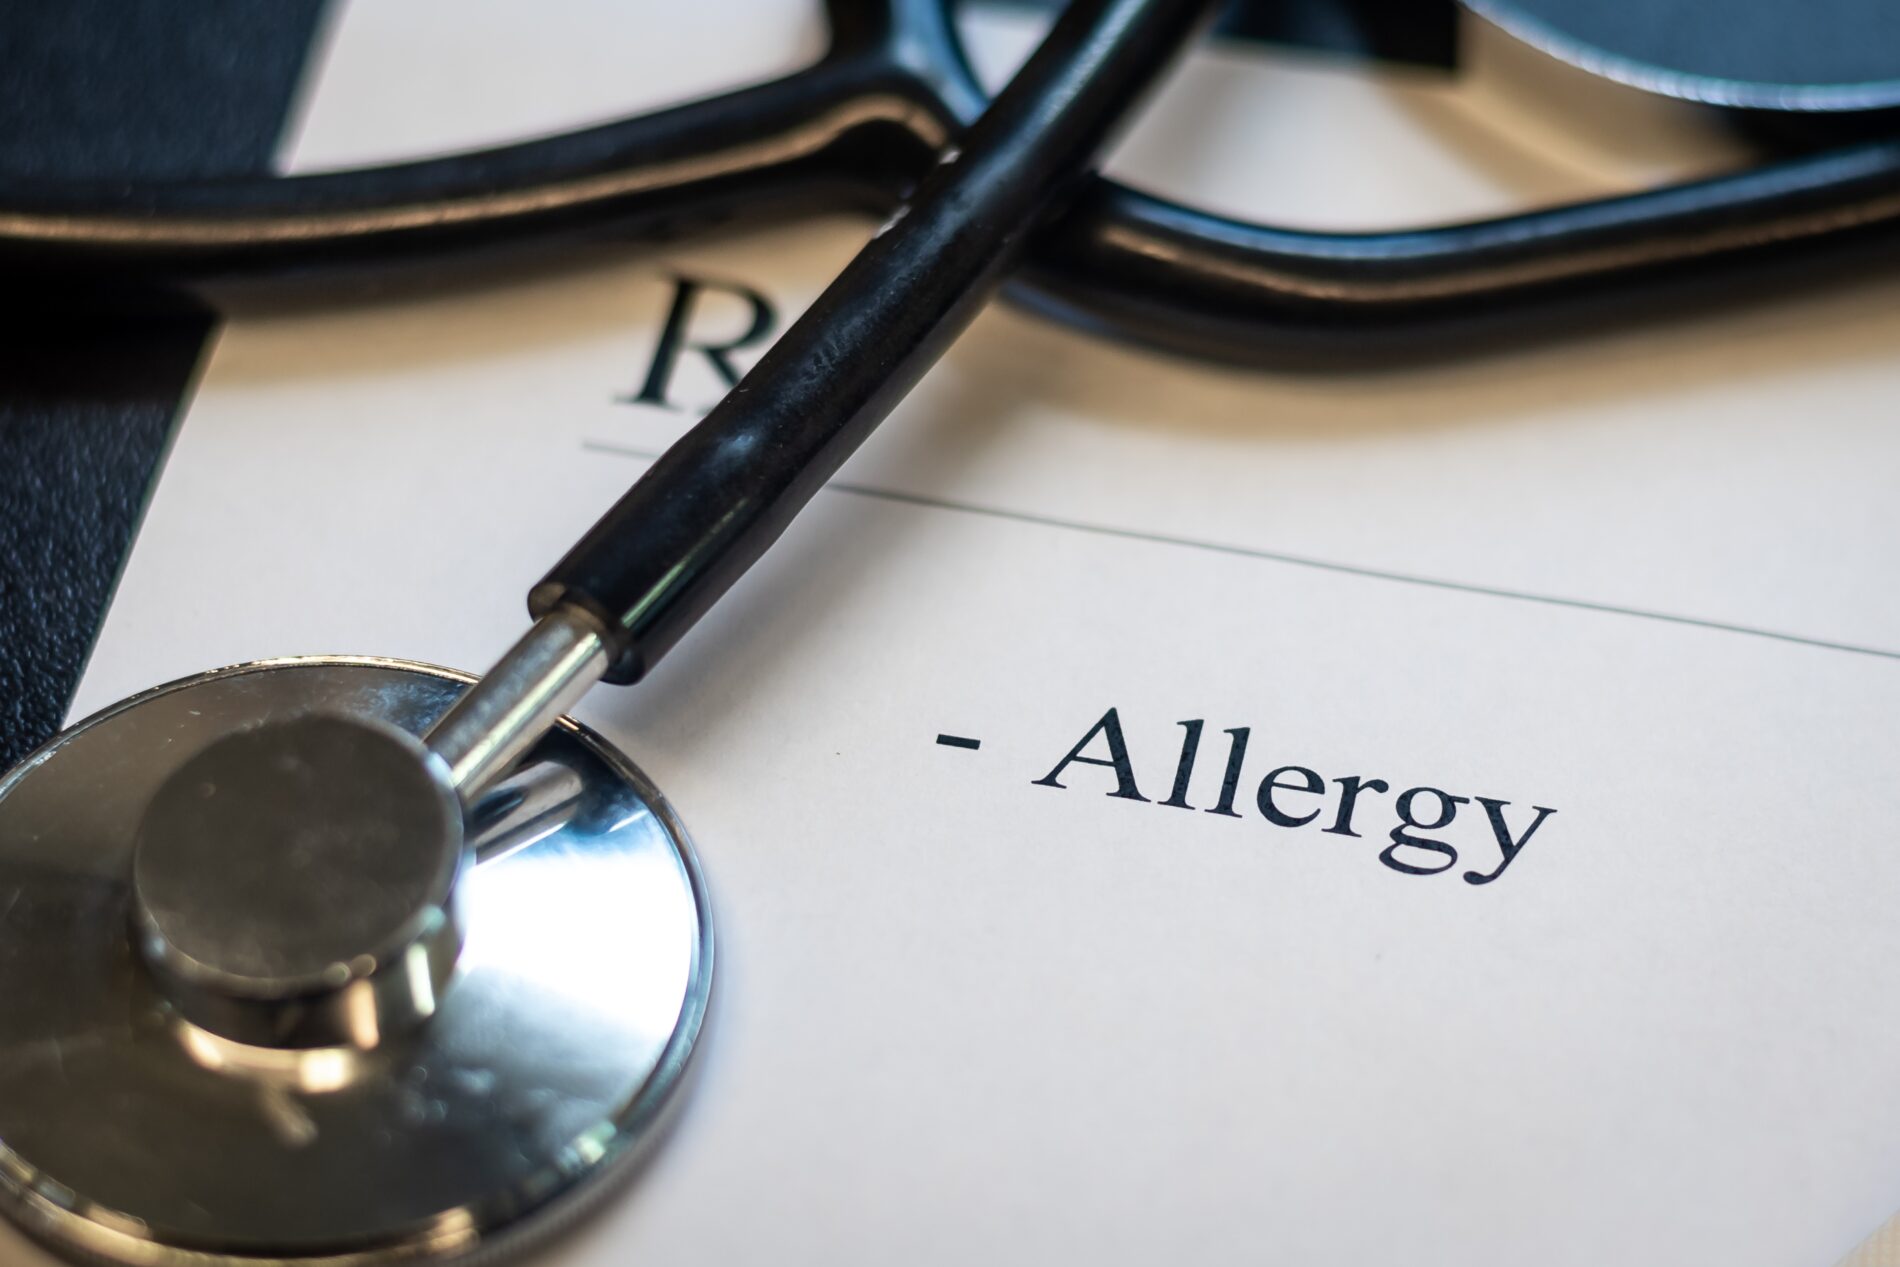 The Definitive Guide To Finding Effective Allergy Relief: Exploring The Best Medications